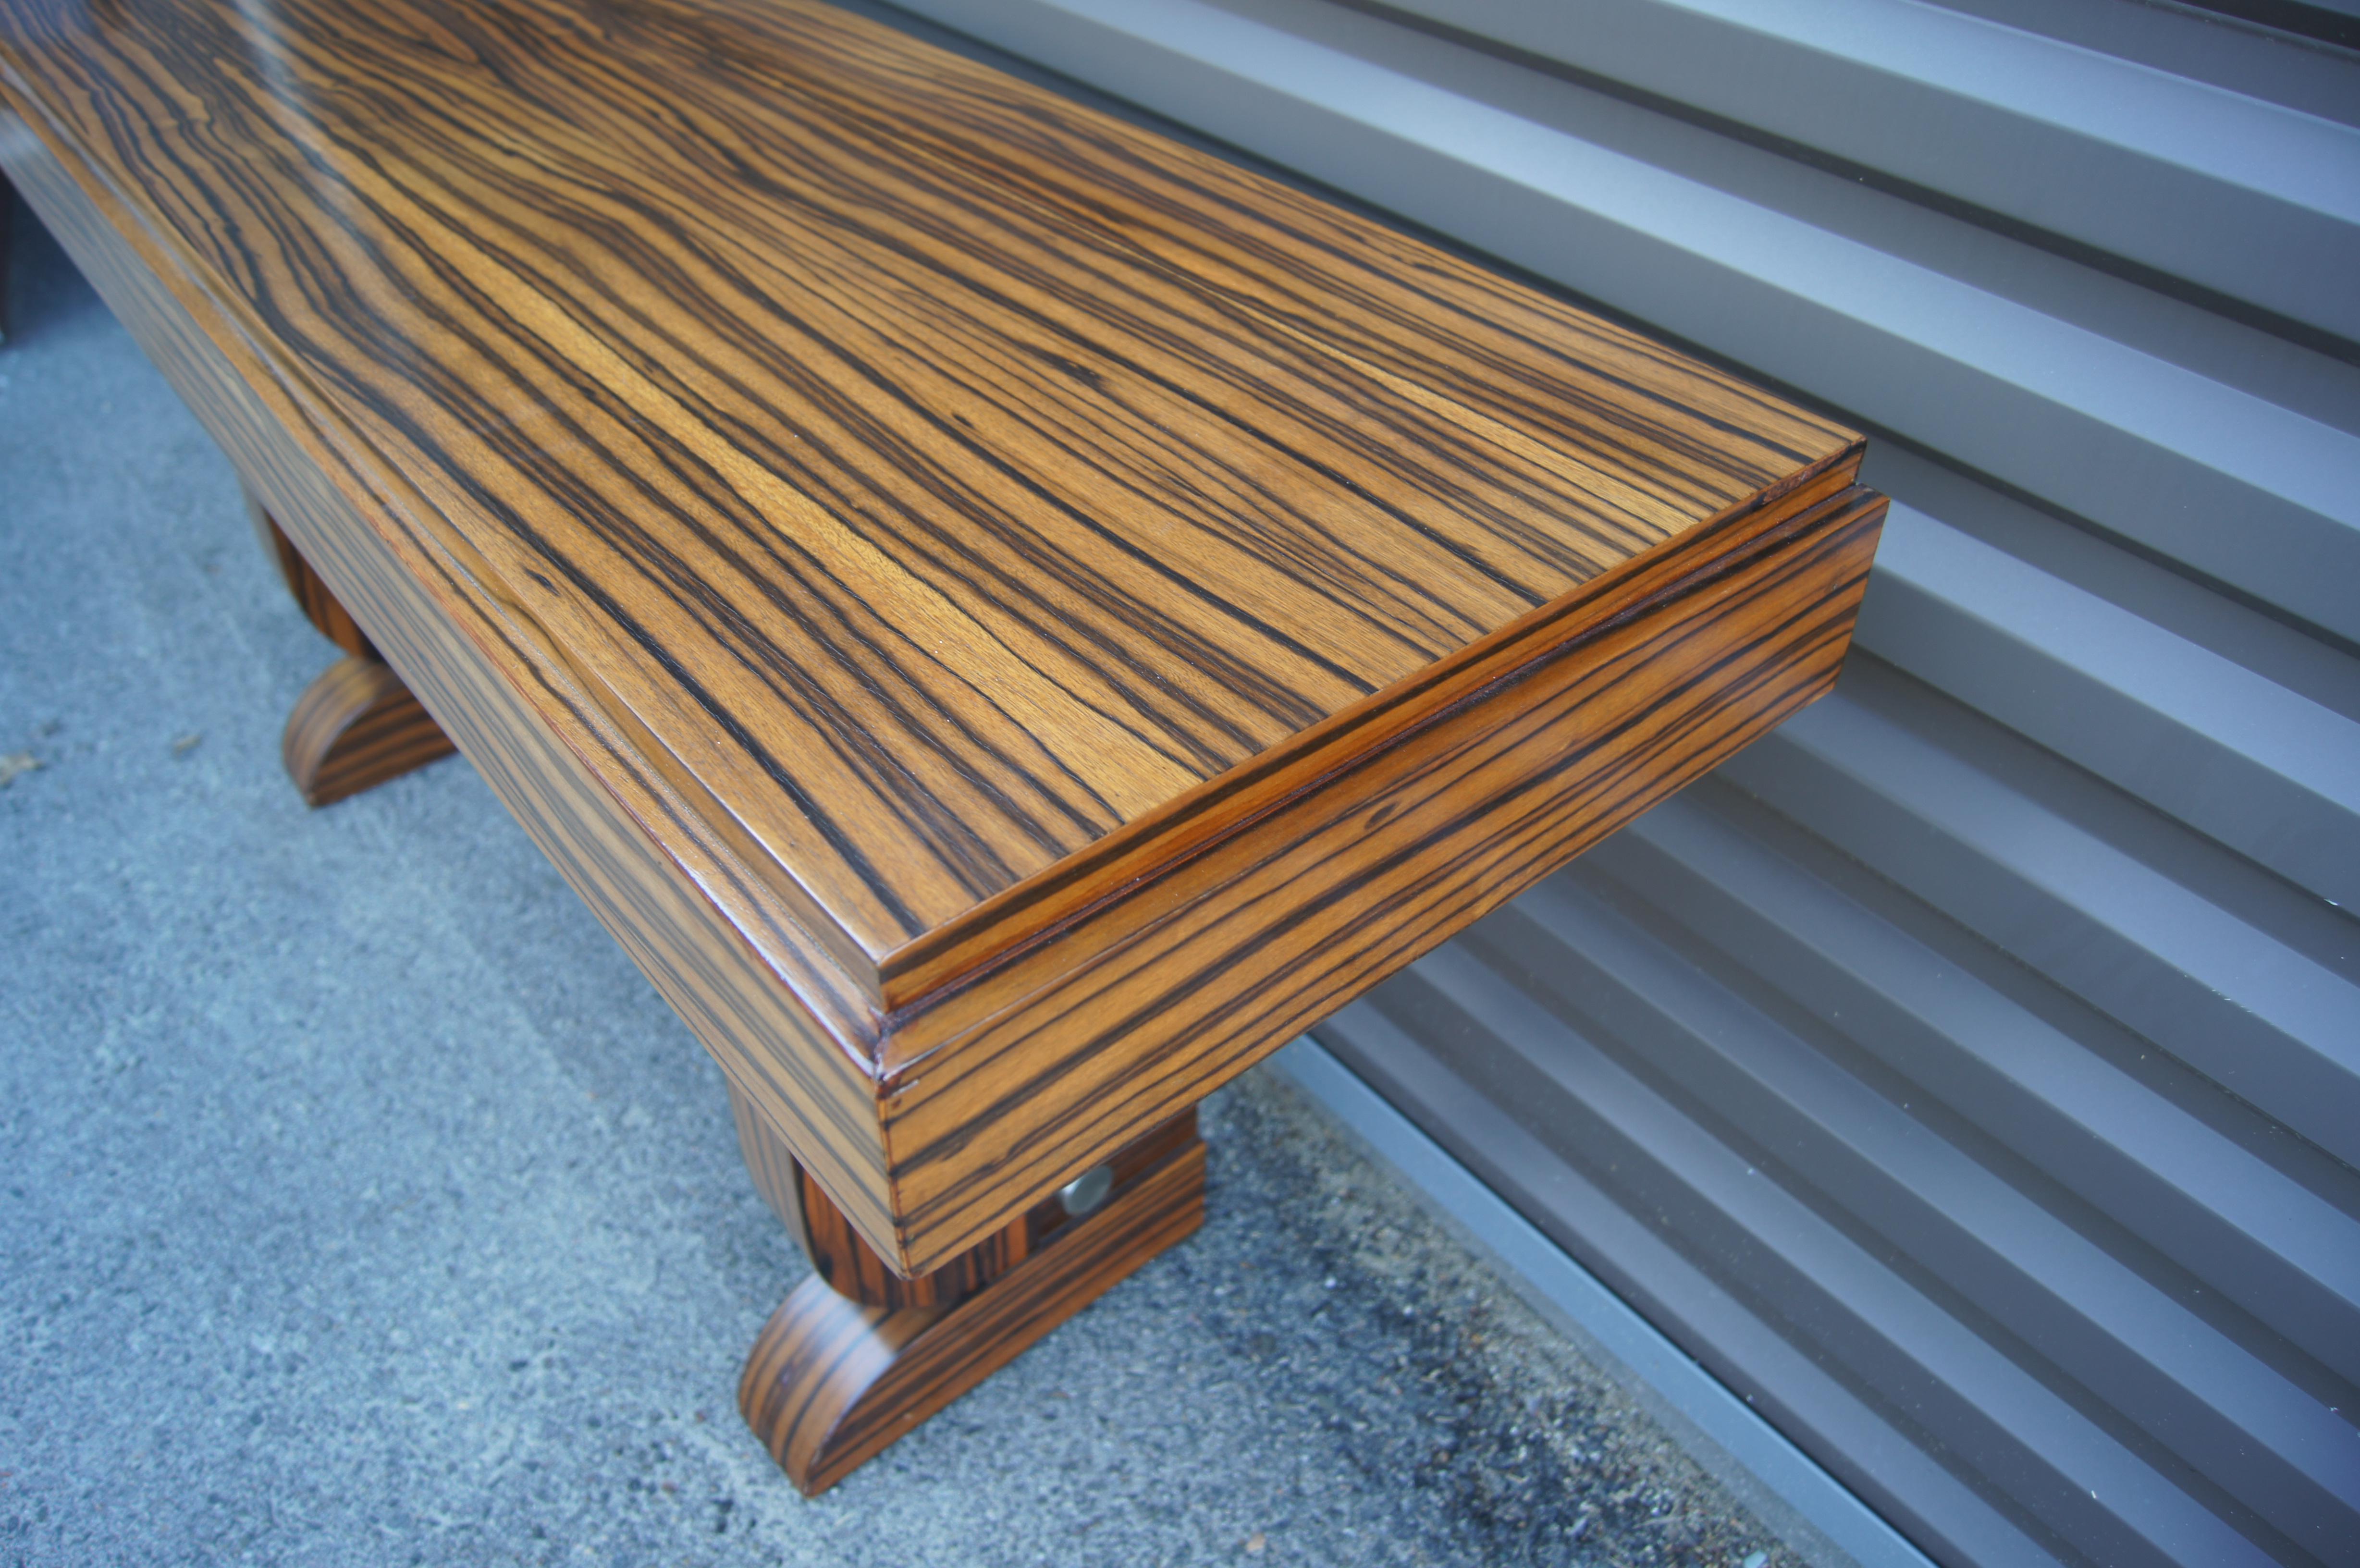 This striking console, in a richly grained zebrawood, has a muscular Art Deco aesthetic. The top is 4.5 inches thick with a slight setback along the front and sides. An aluminum bar stabilizes the 3-inch-thick legs, which curve inward and back out